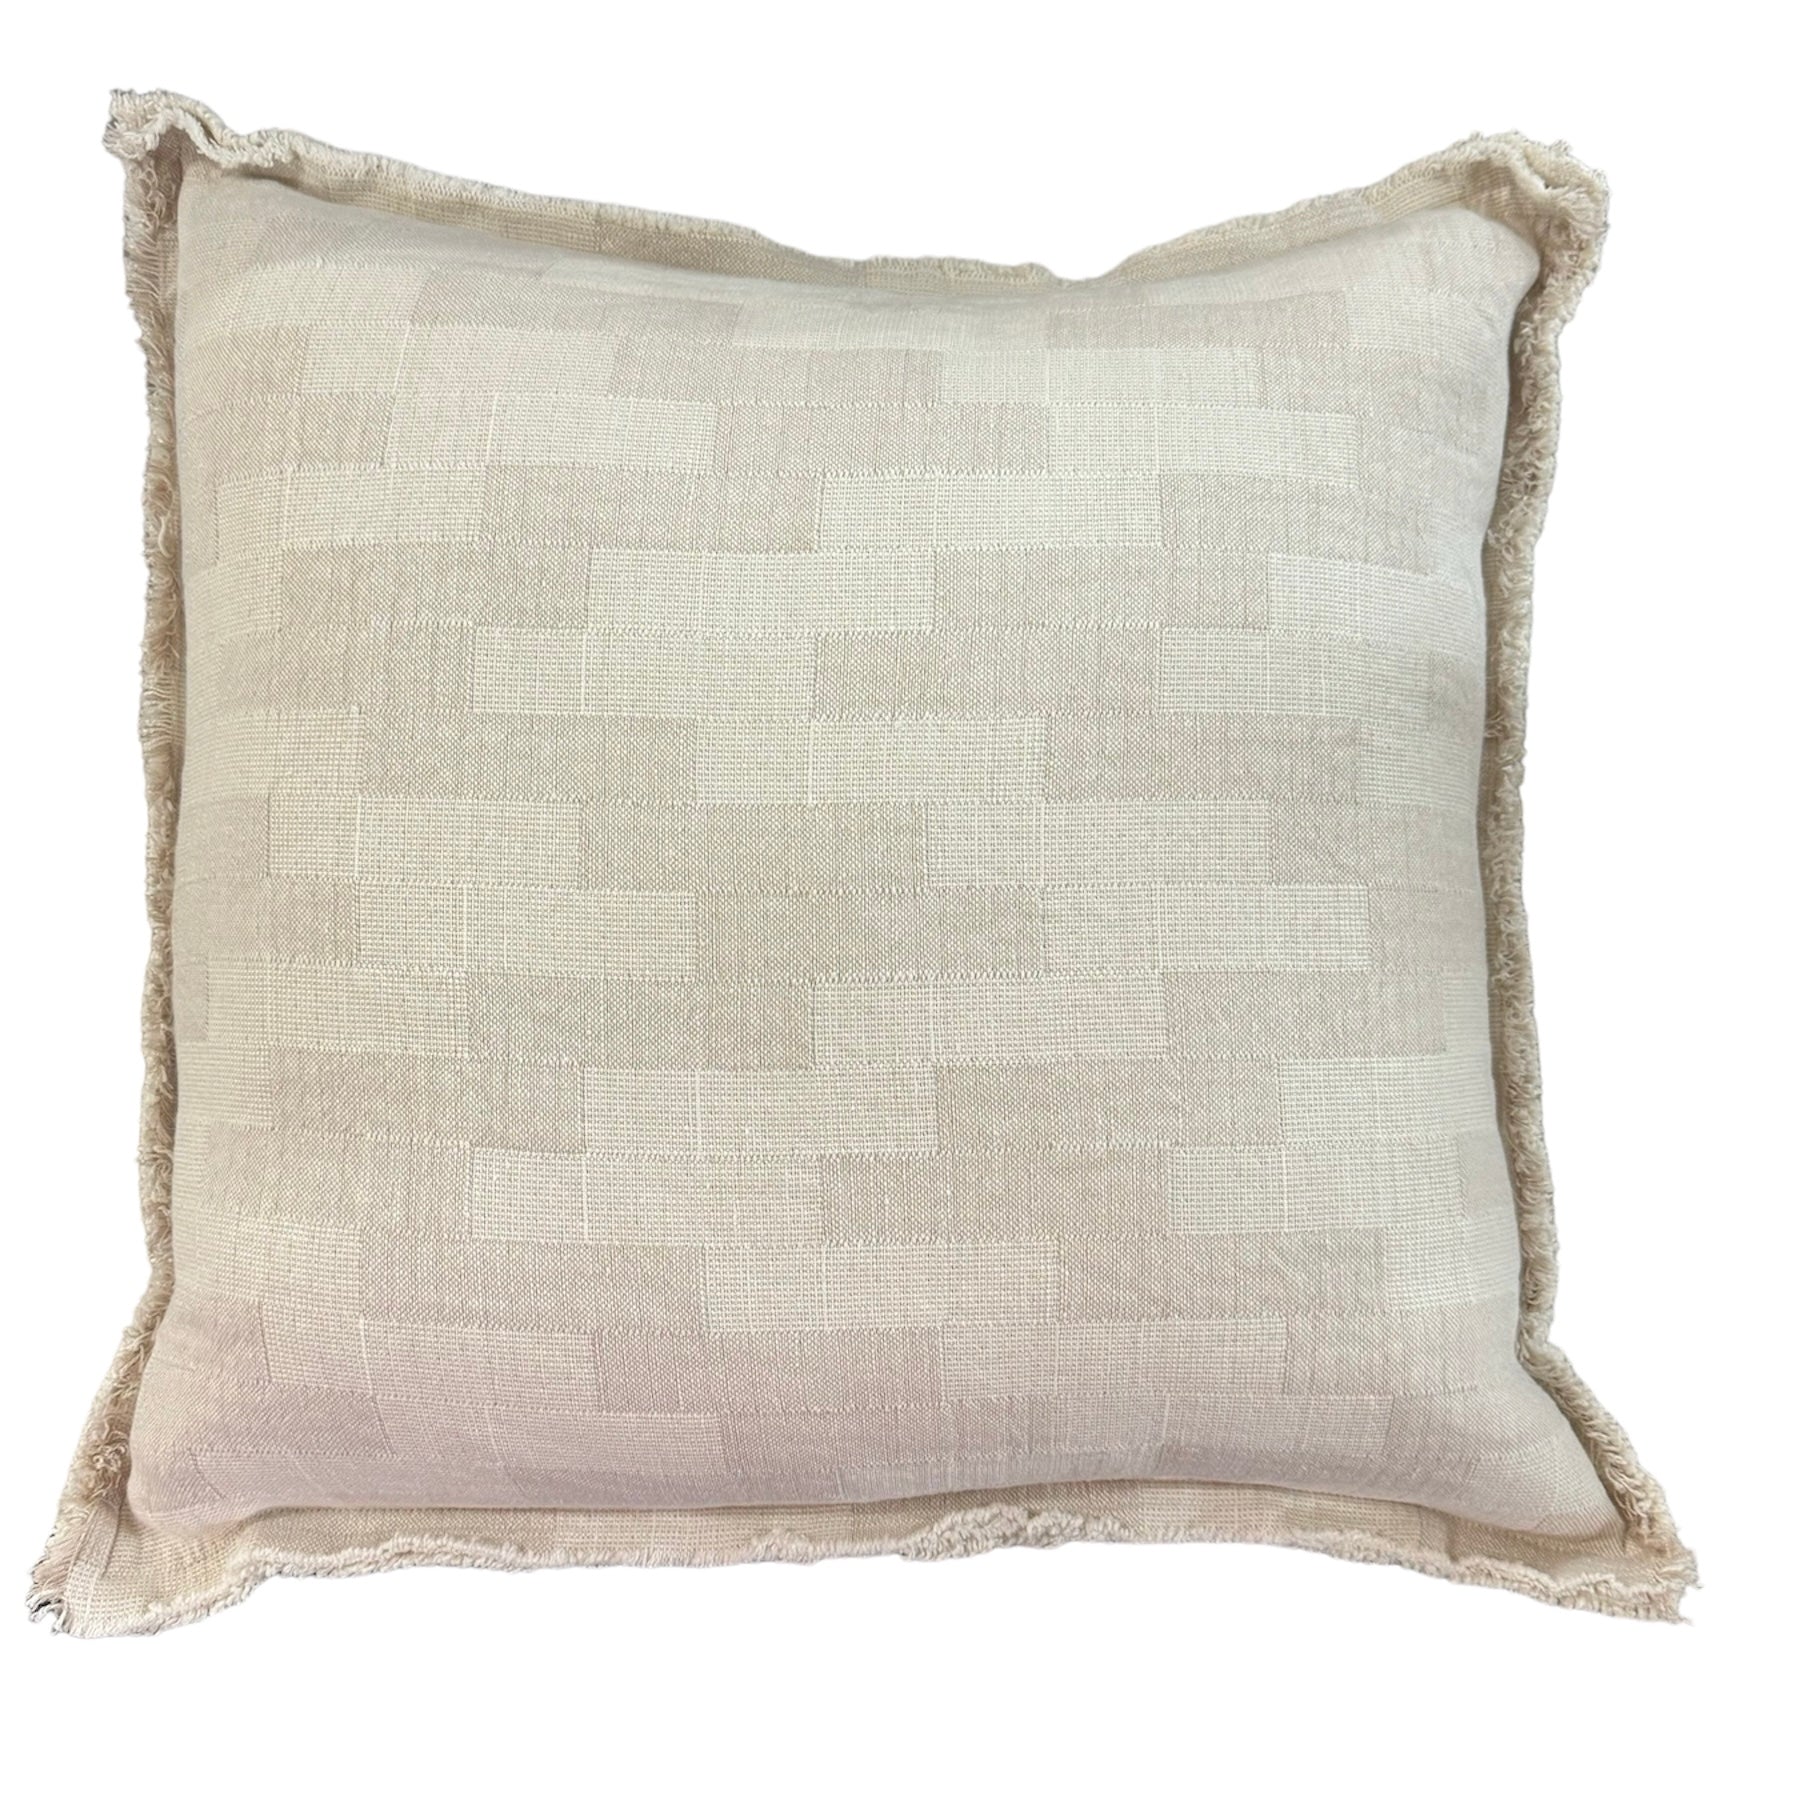 Pieced Together Pillow - Creme